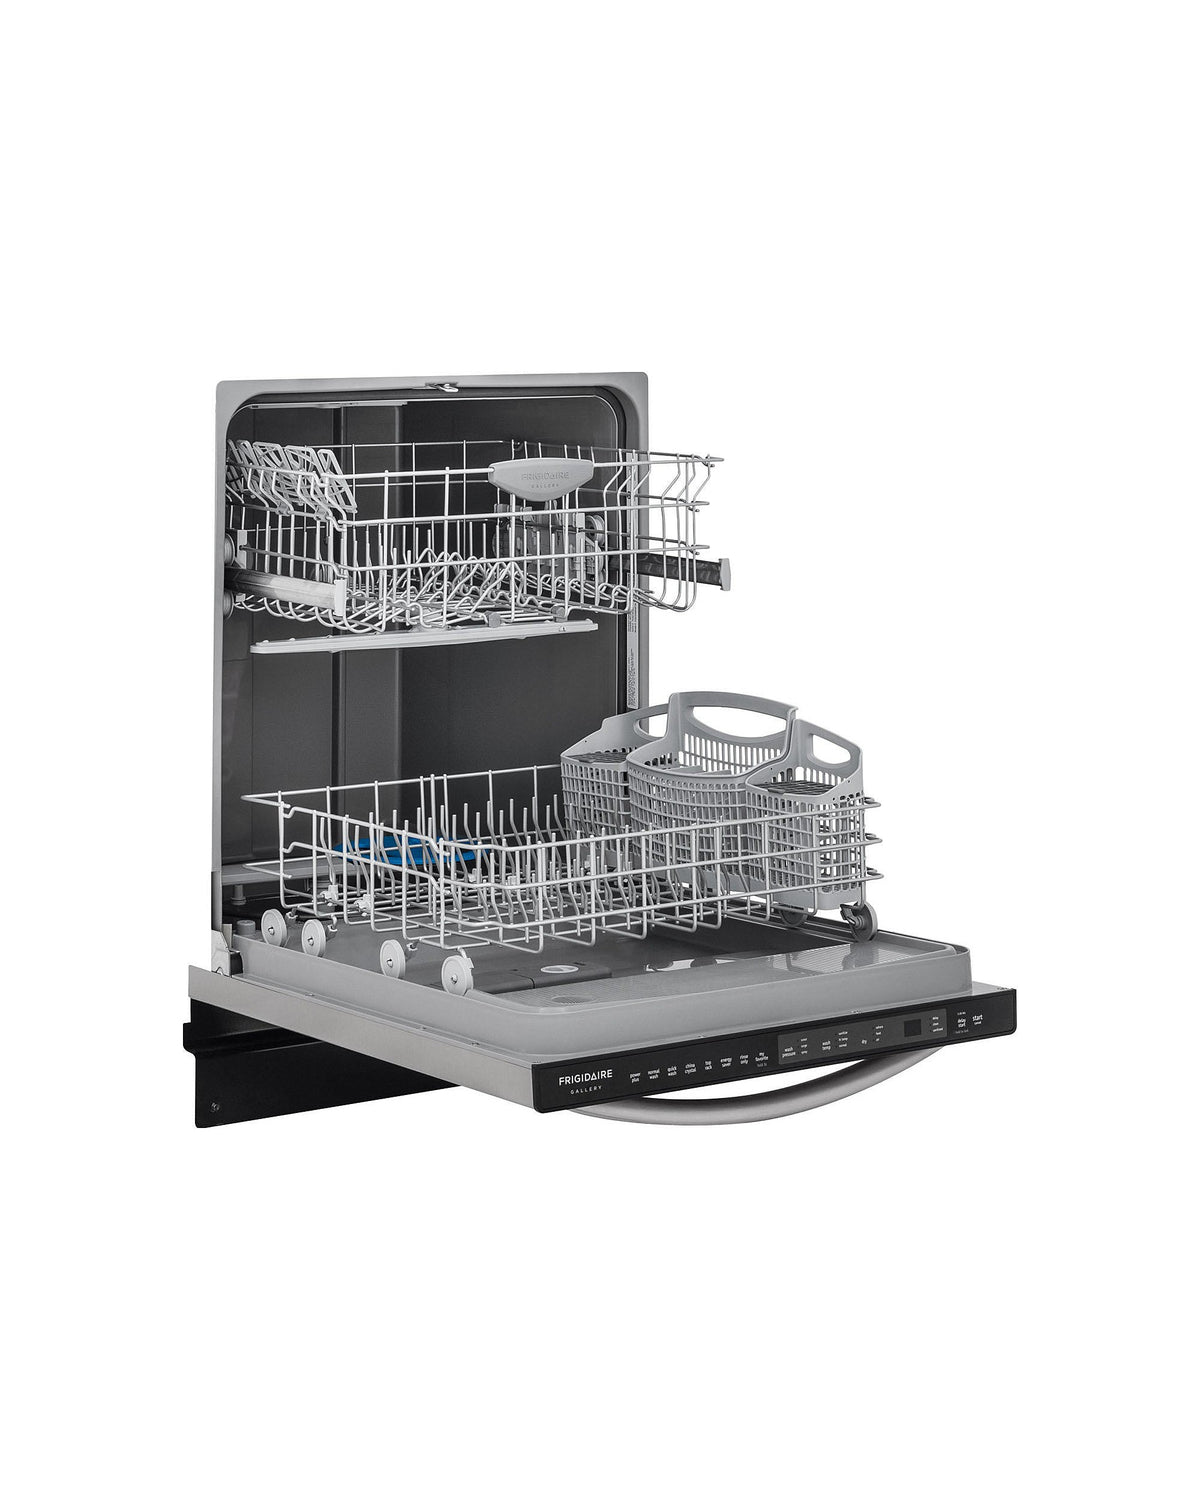 FRIGIDAIRE Gallery FGID2466QF 24&quot; Built-In Dishwasher - Stainless Steel